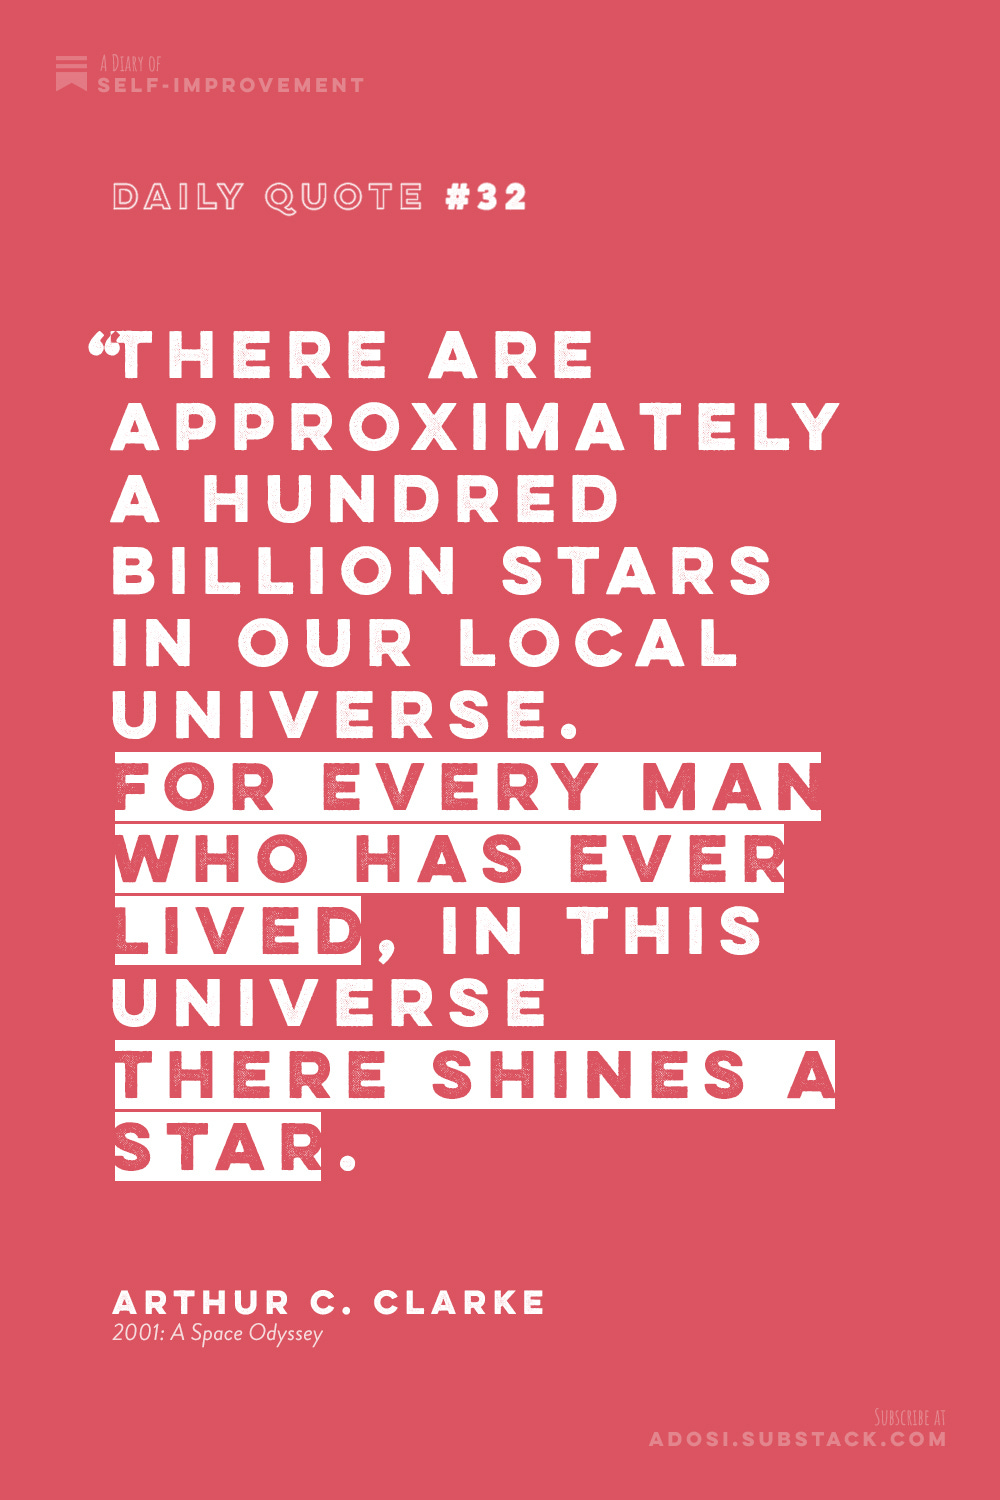 Daily Quote #32: there are approximately a hundred billion stars in our local universe. So for every man who has ever lived, in this Universe there shines a star." Arthur C. Clarke, 2001: A Space Odyssey